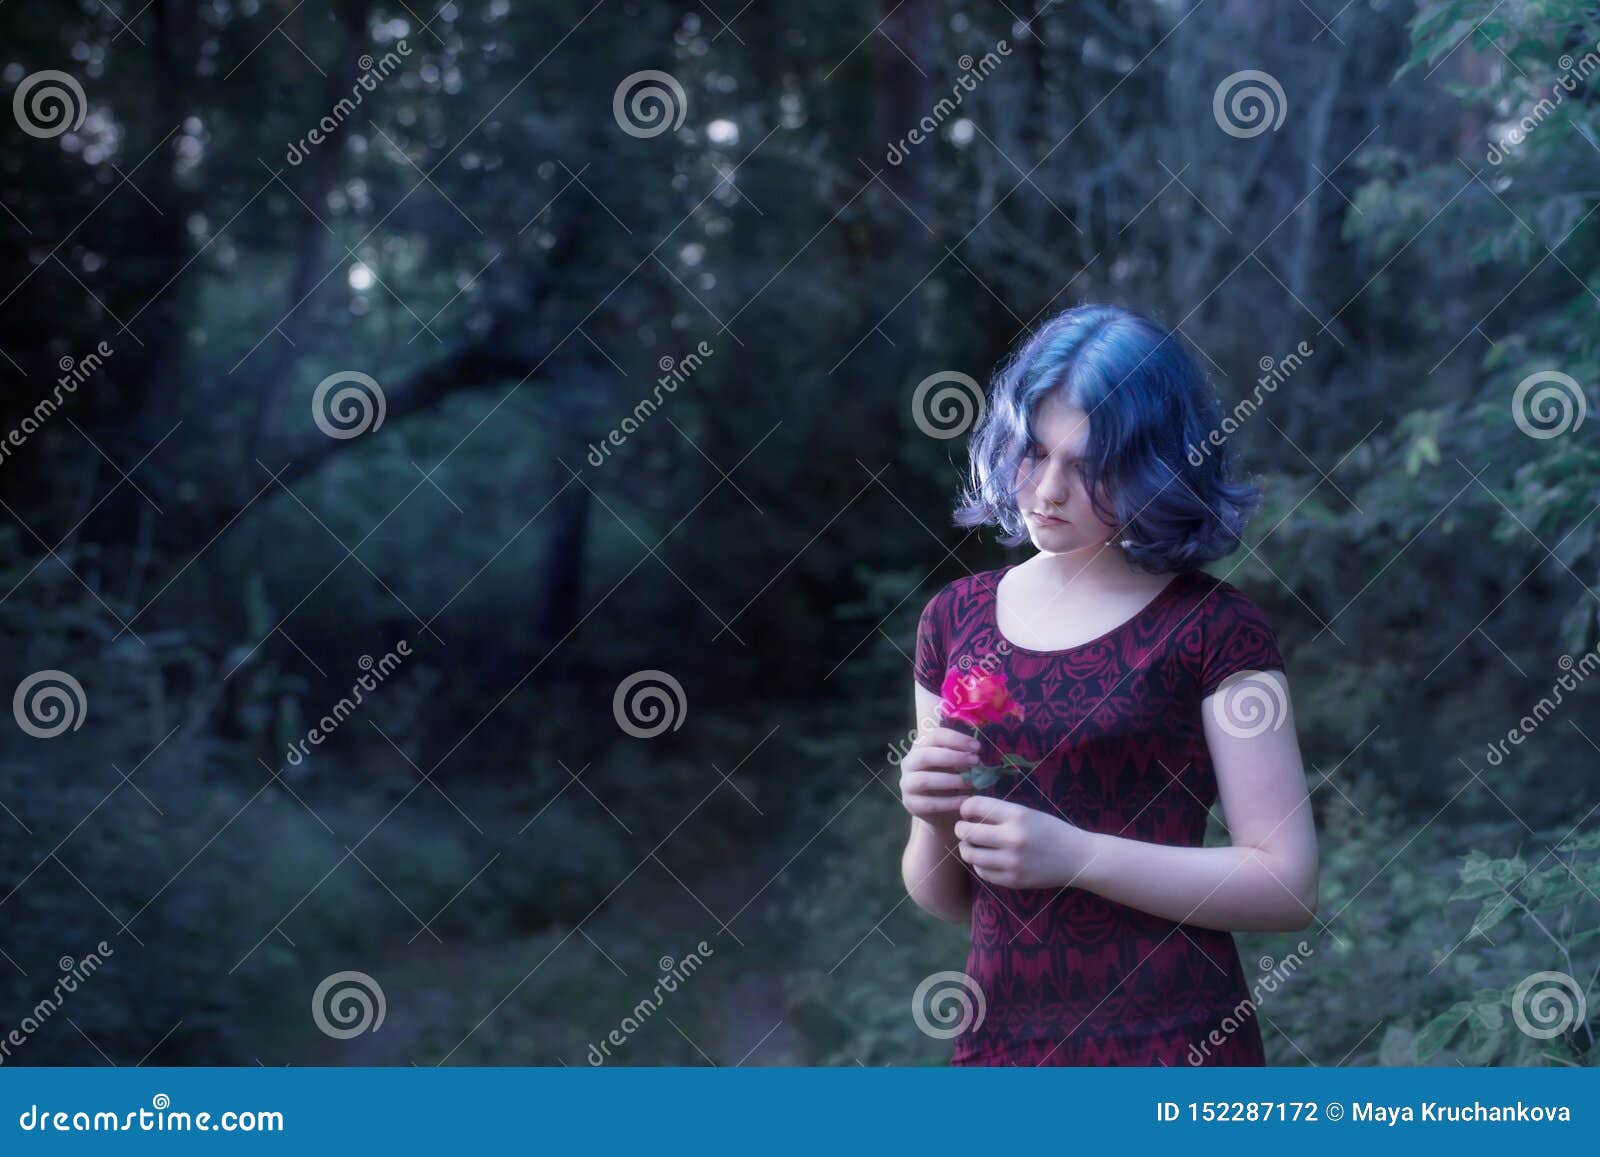 Blue hair in the forest at night - wide 1